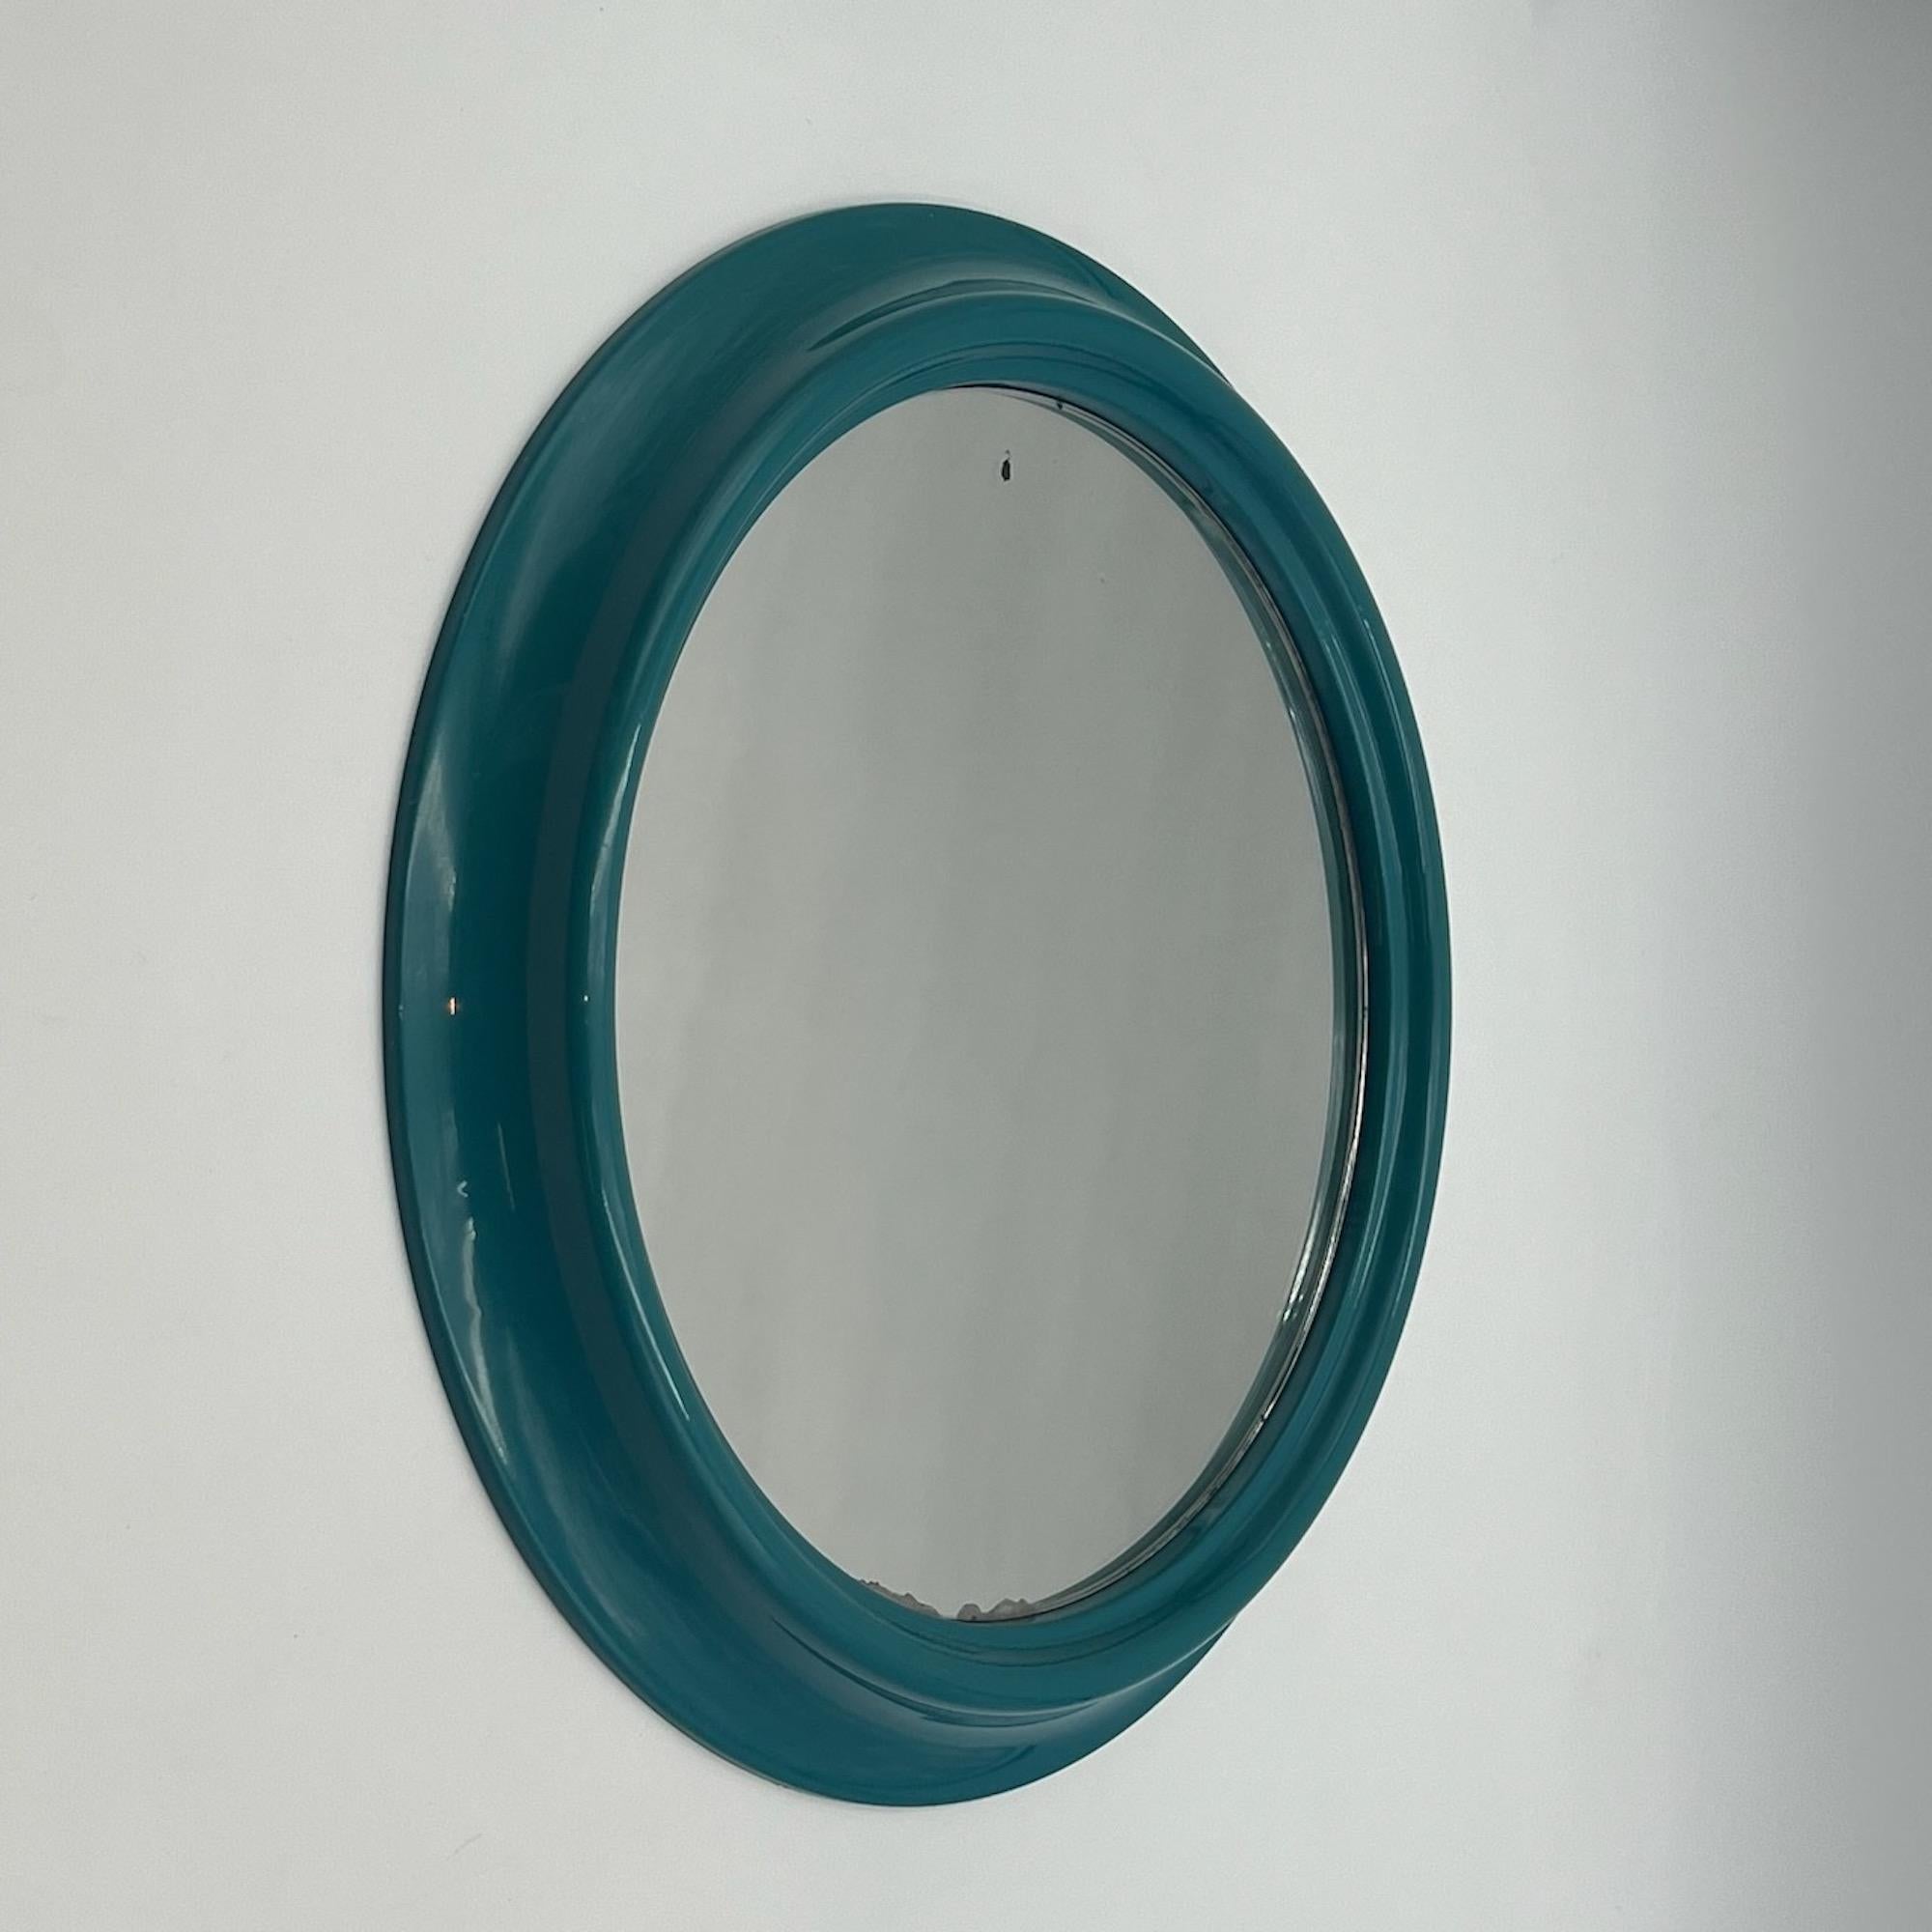 Immerse yourself in the charm of vintage Italian design with this exquisite Wall Mirror crafted in the 70s. The curved round frame, made of moulded plastic in a beautiful turquoise blue hue, exudes the timeless elegance of mid-century aesthetics.